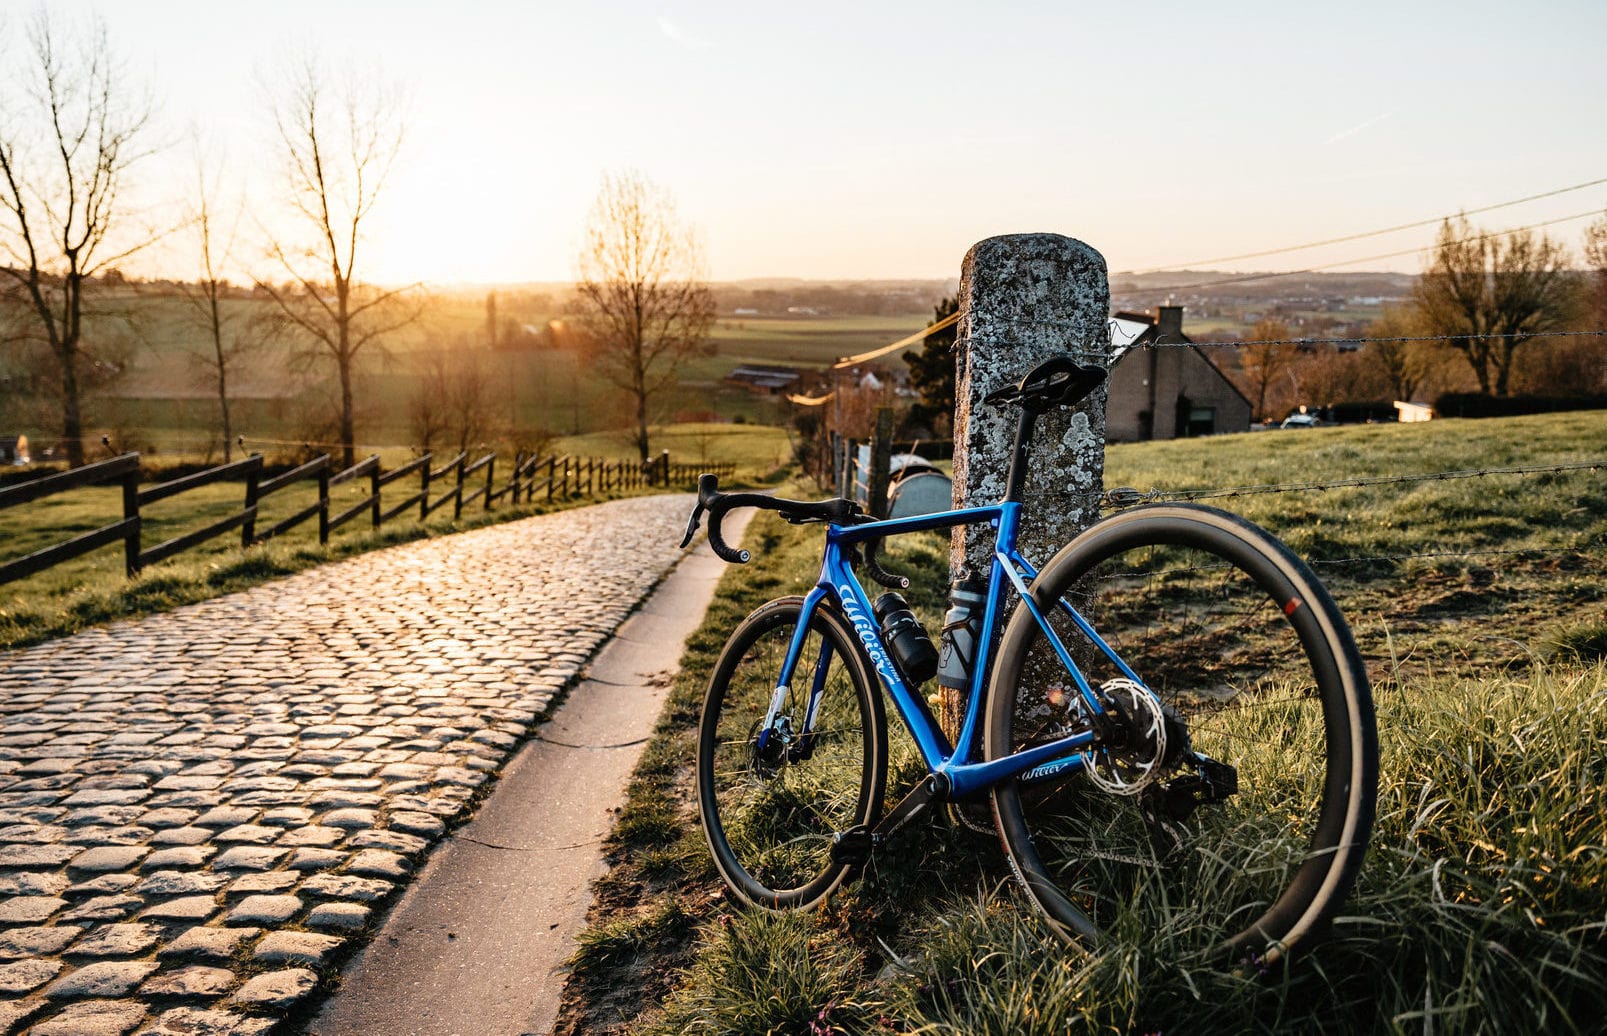 Tour of Flanders: A Monument of Cycling and Culture